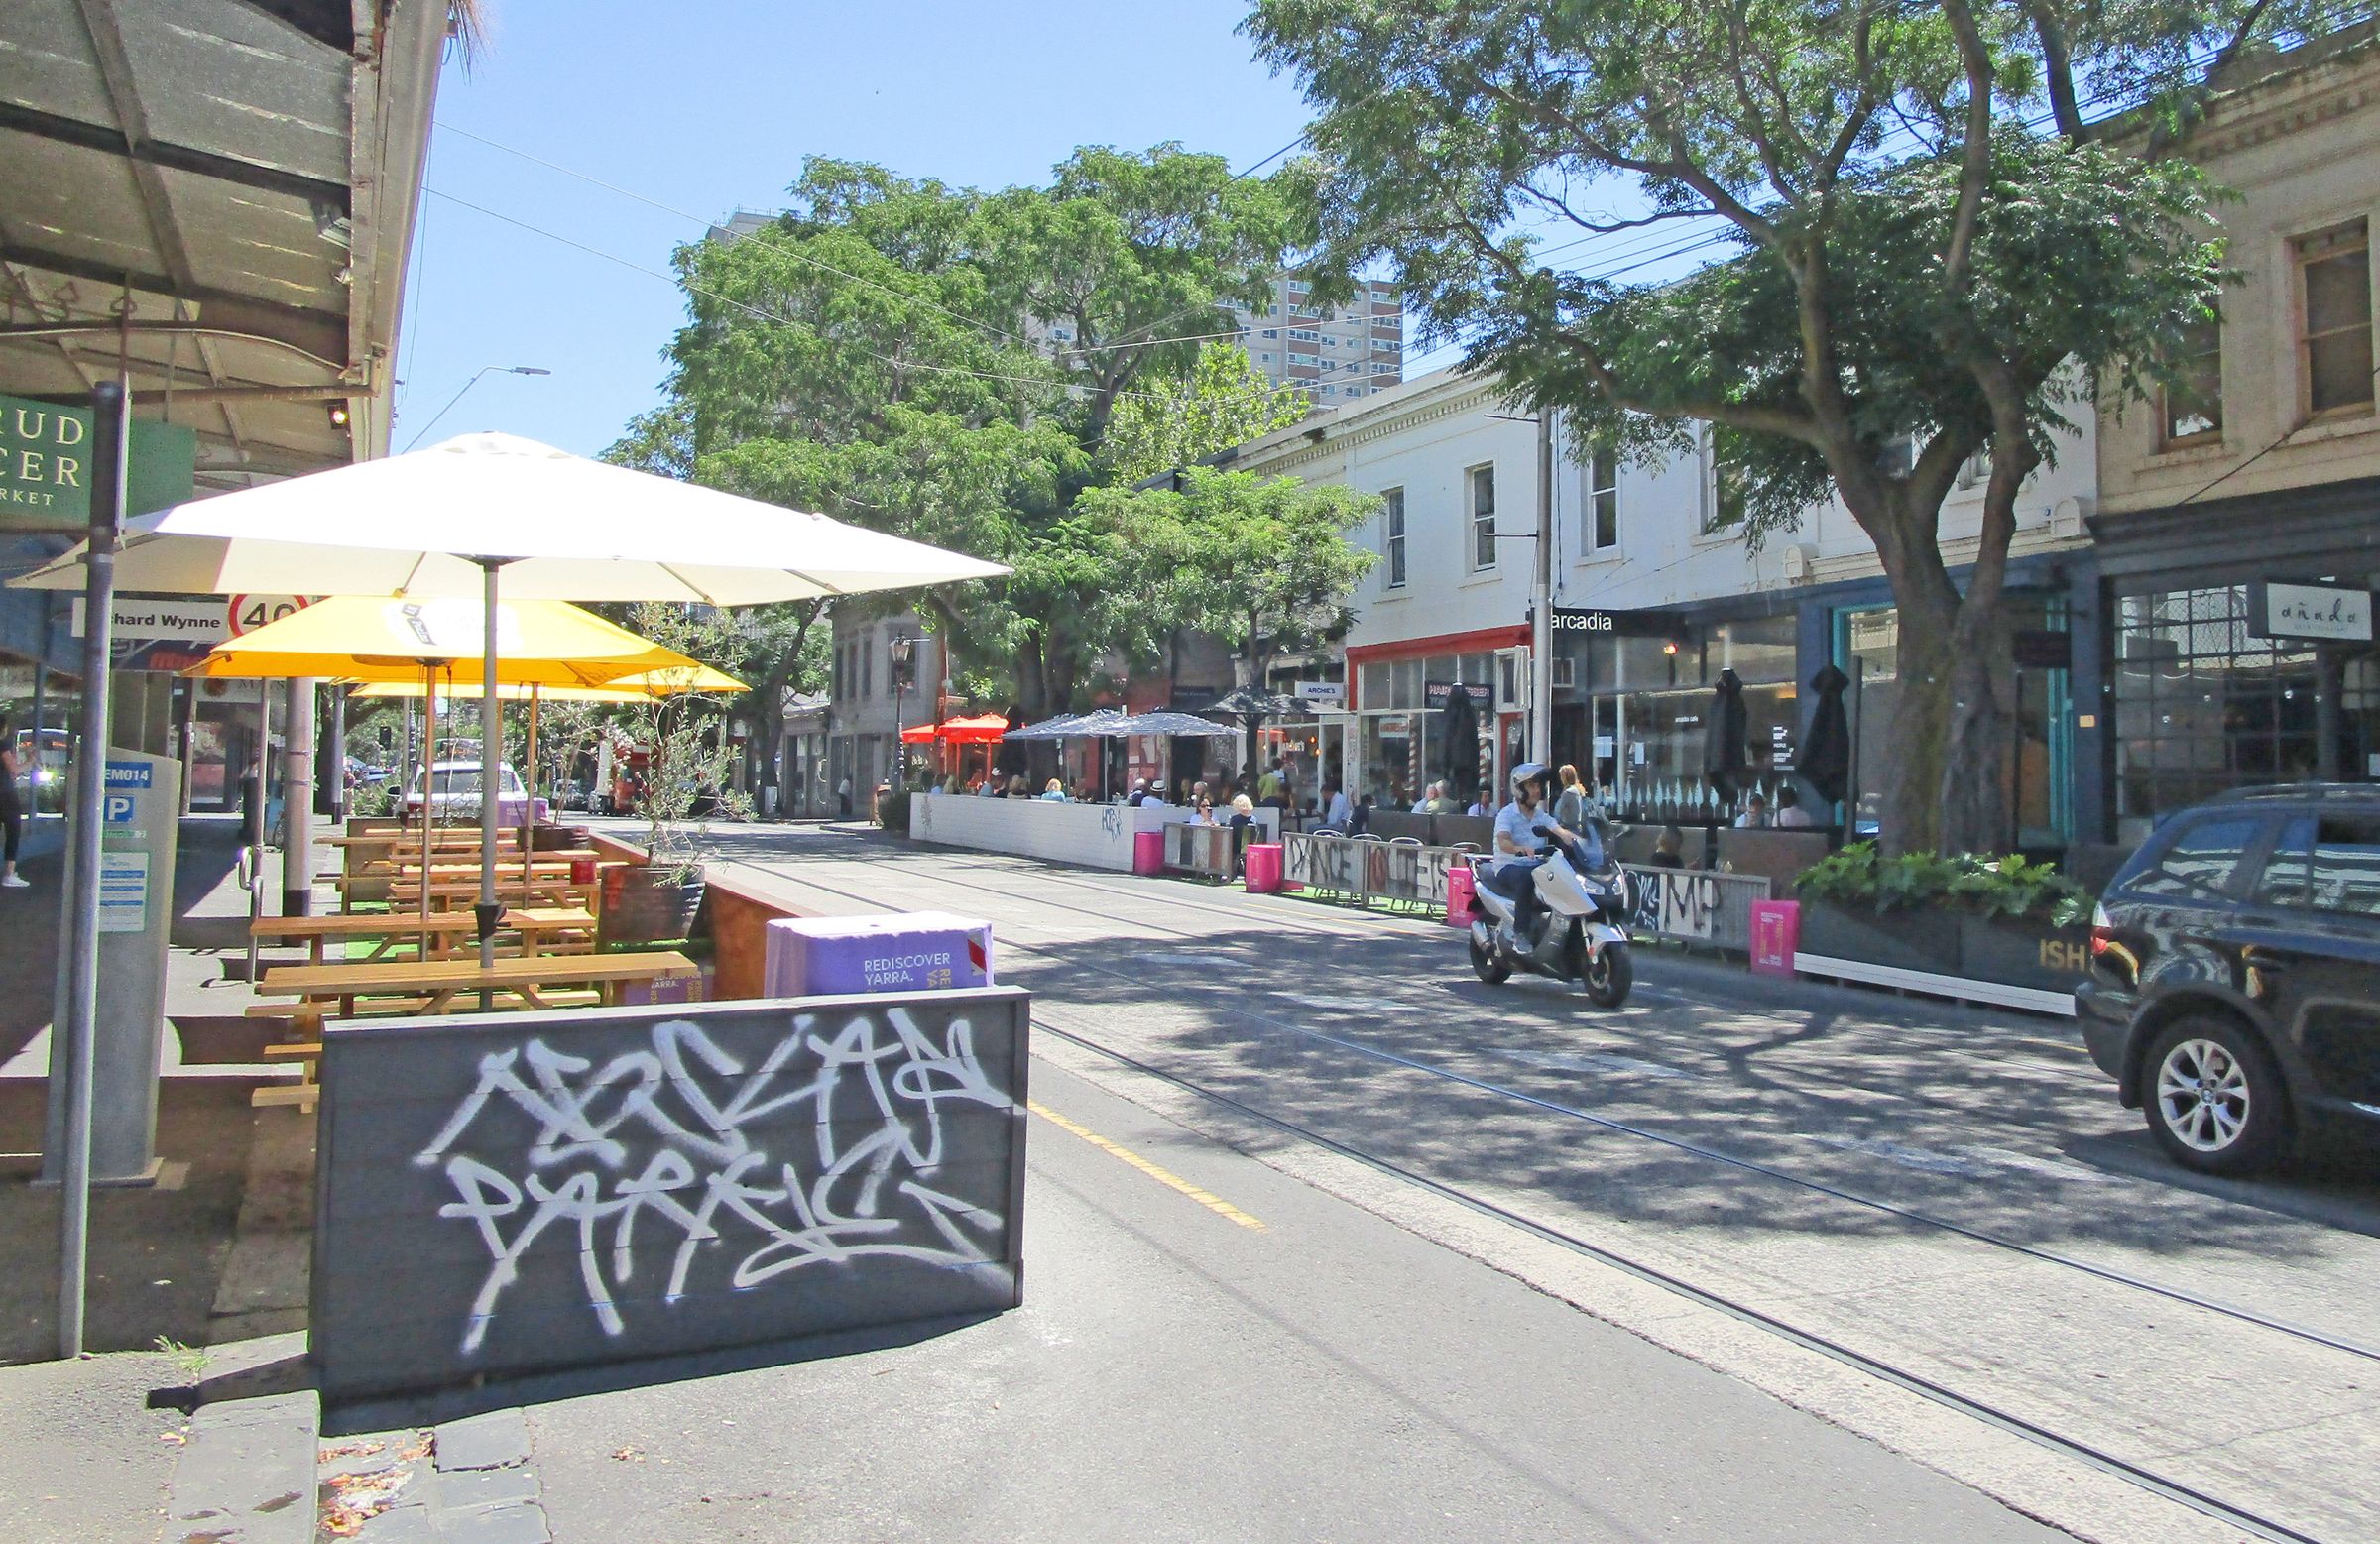 A retail street with continuous parklets on either side of the street with fencing, tables and umbrellas. A car and motorcycle drive down the tree-lined street which also has a tram line.